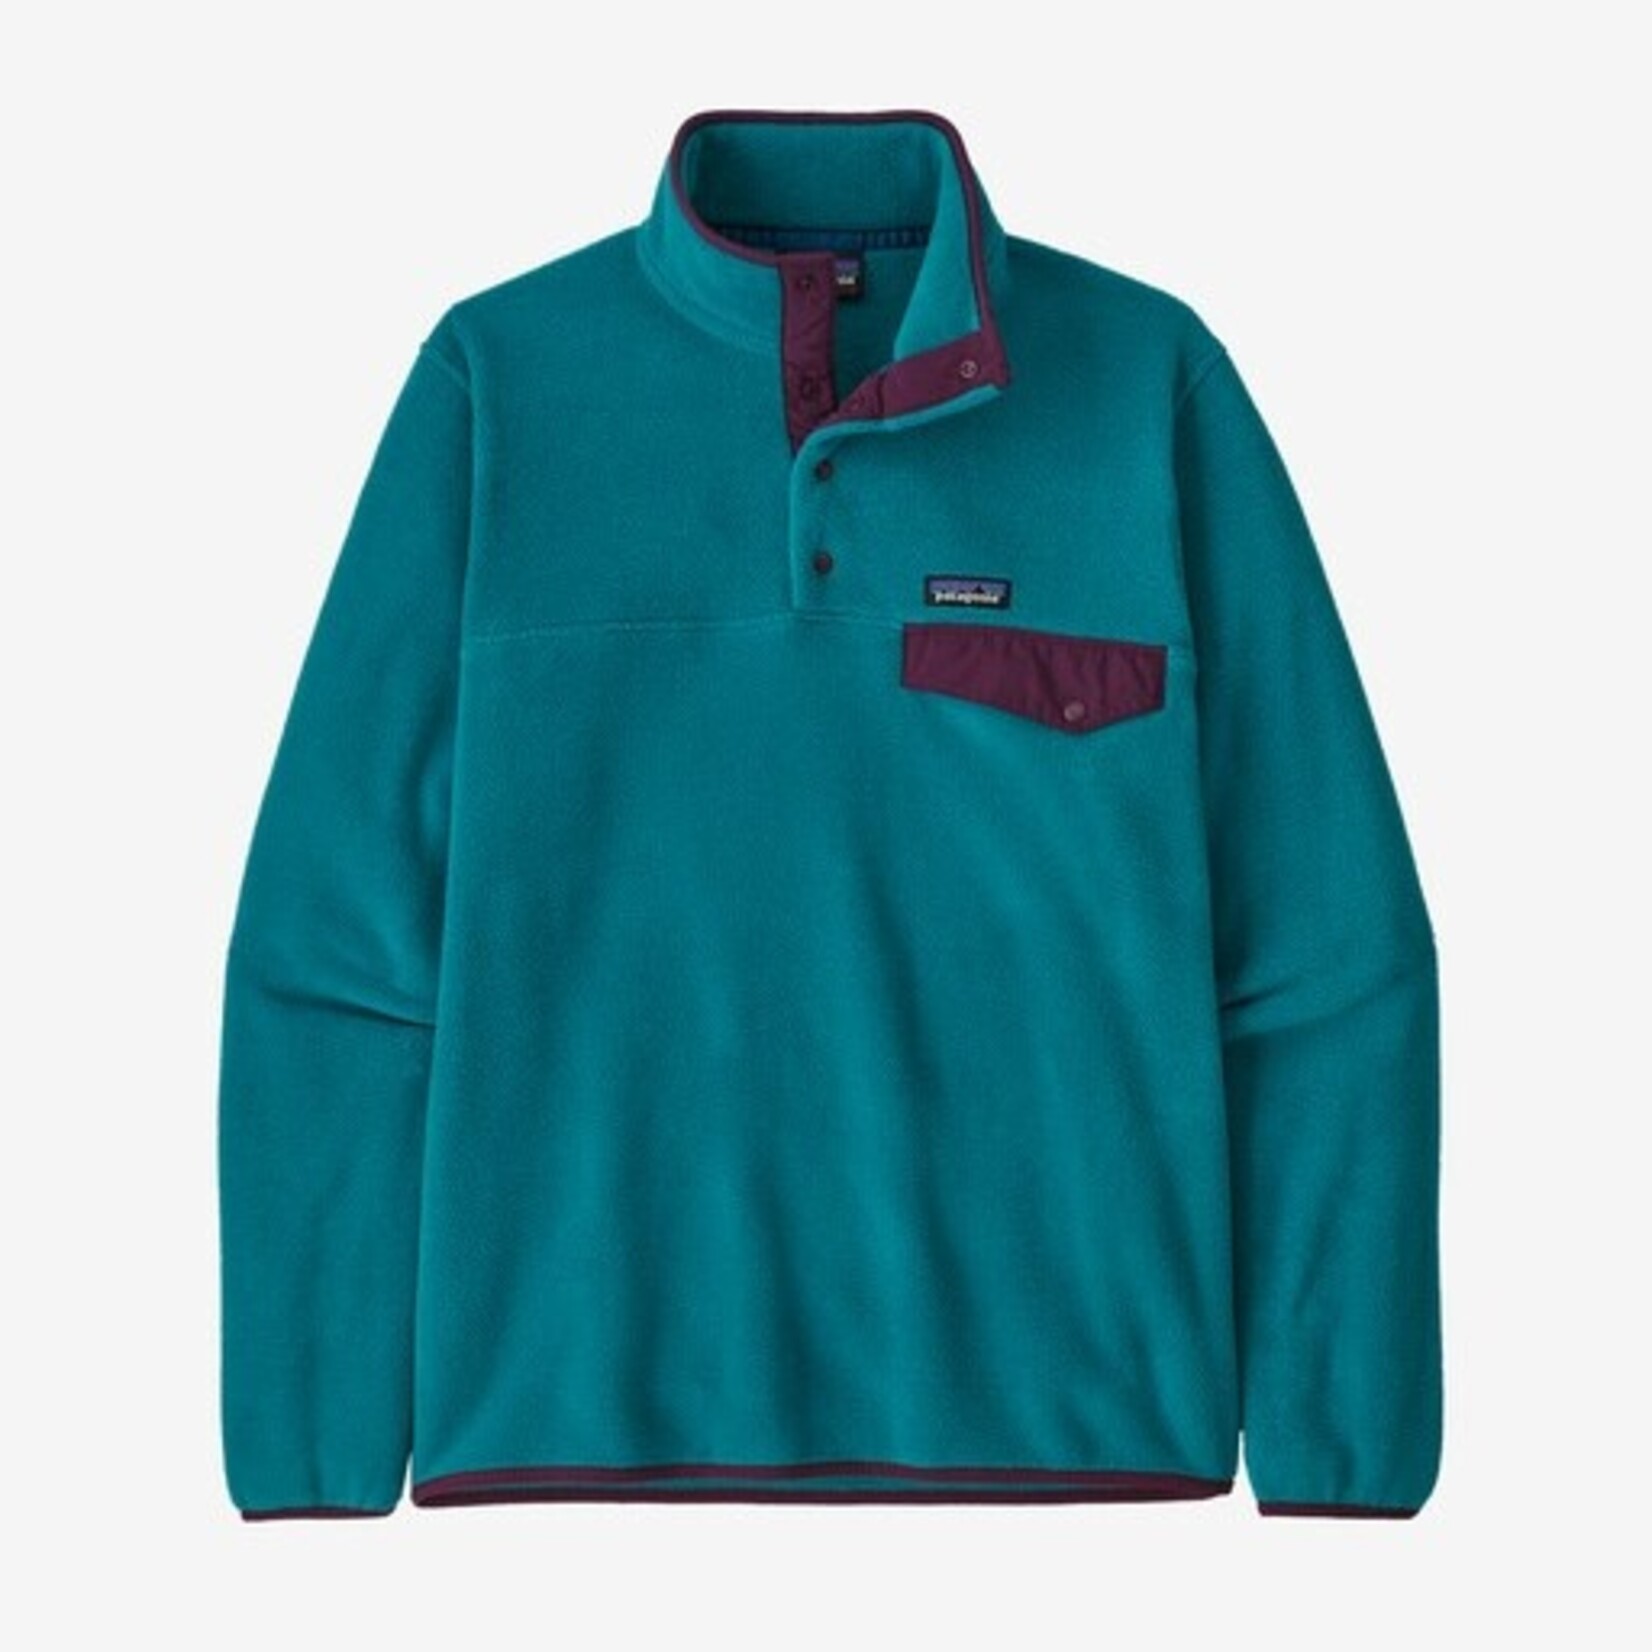 Patagonia M’s LW synchilla snap T